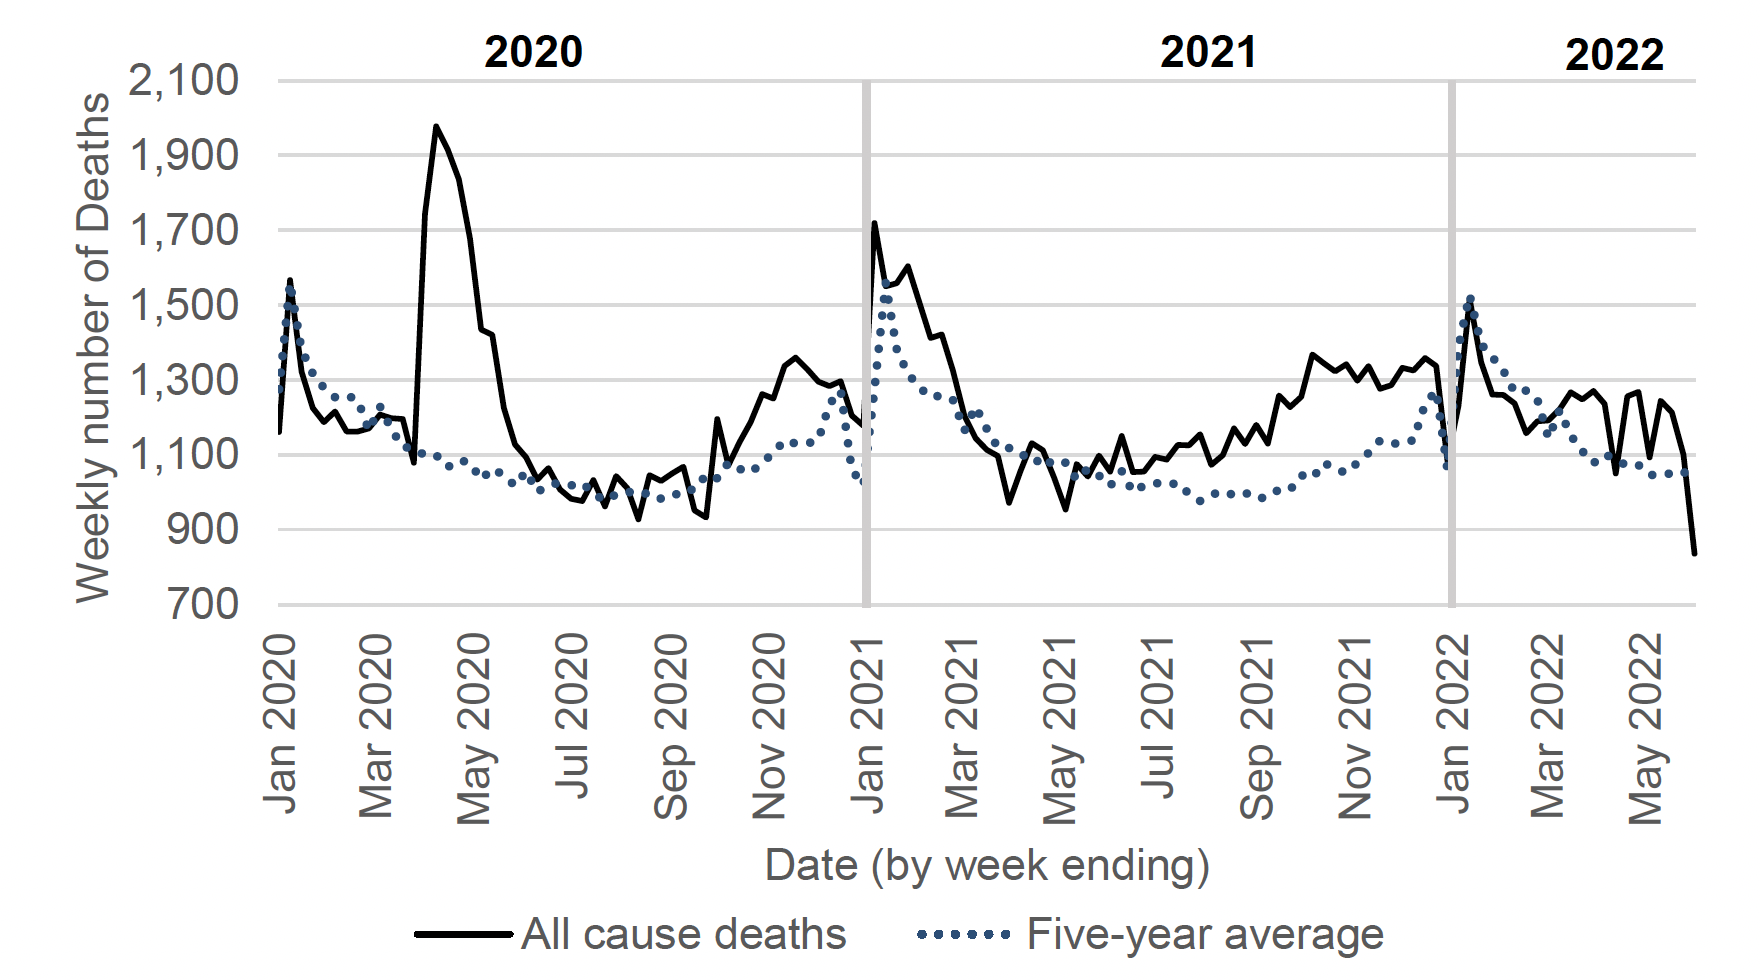 a line chart showing the total number of weekly deaths from all causes in Scotland from January 2020 to early June 2022 with a solid line, and the five-year average weekly deaths for previous years with a dotted line. The total number of weekly deaths rose above the previous five-year average for the corresponding week and peaked in April 2020, November 2020, January 2021, mid-summer and autumn 2021, January 2022 and spring 2022 but fell below the five-year average in the latest week. 